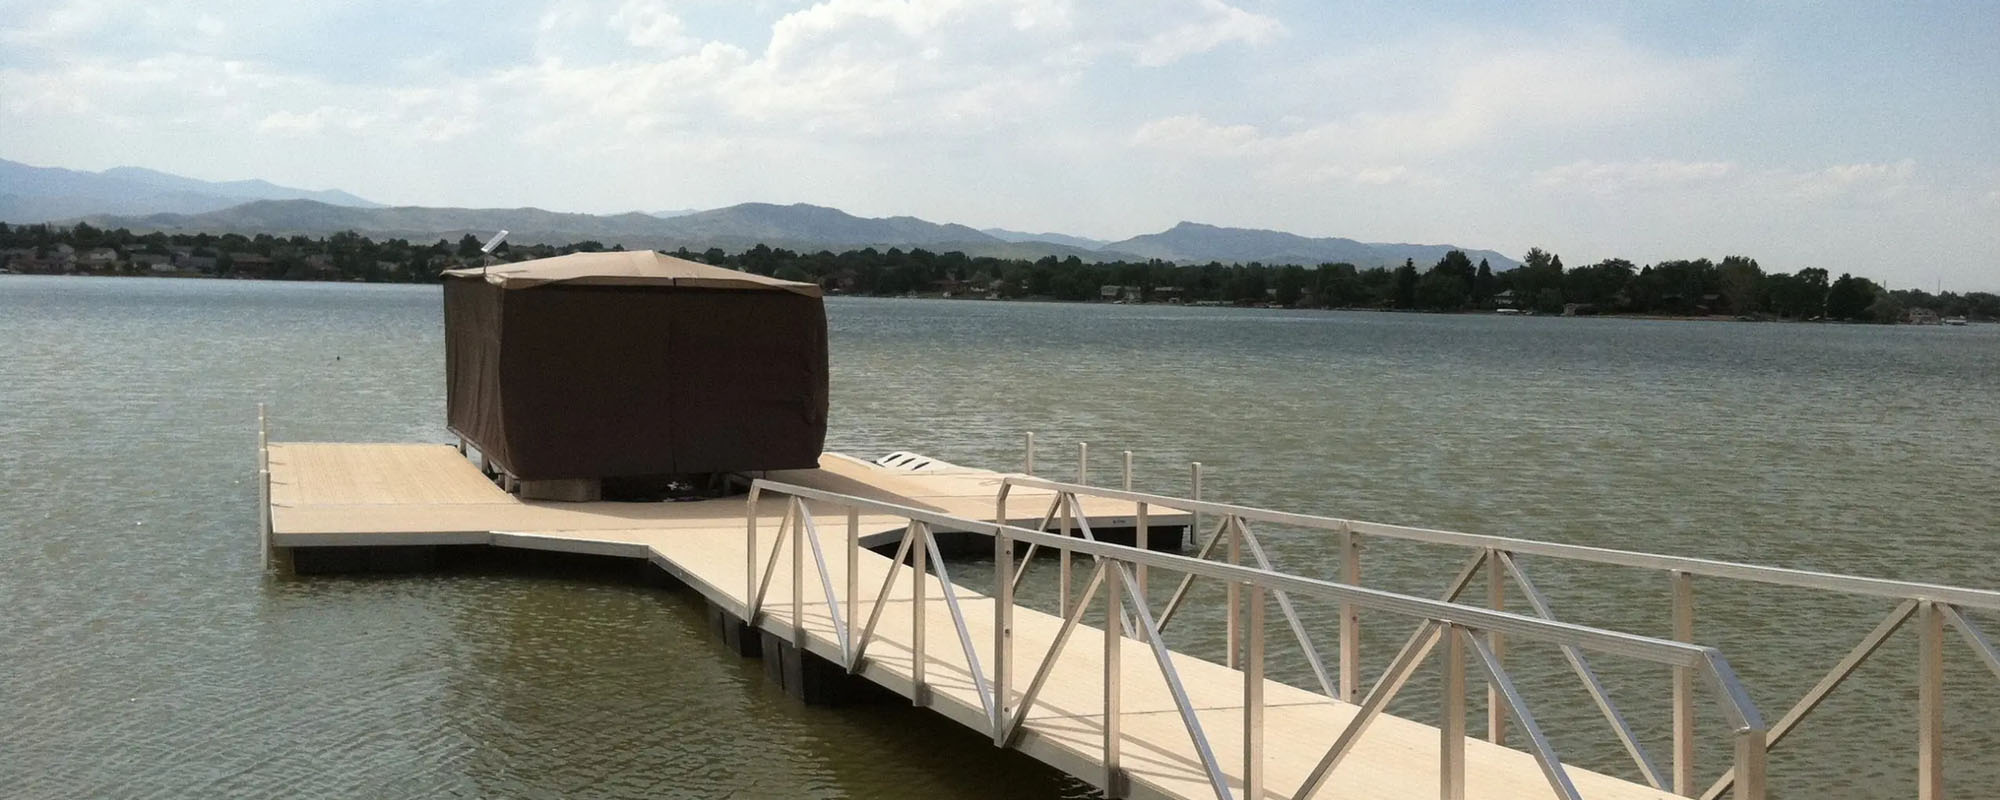 Custom Dock Systems offers sales and installation of Touchless Boat Covers.